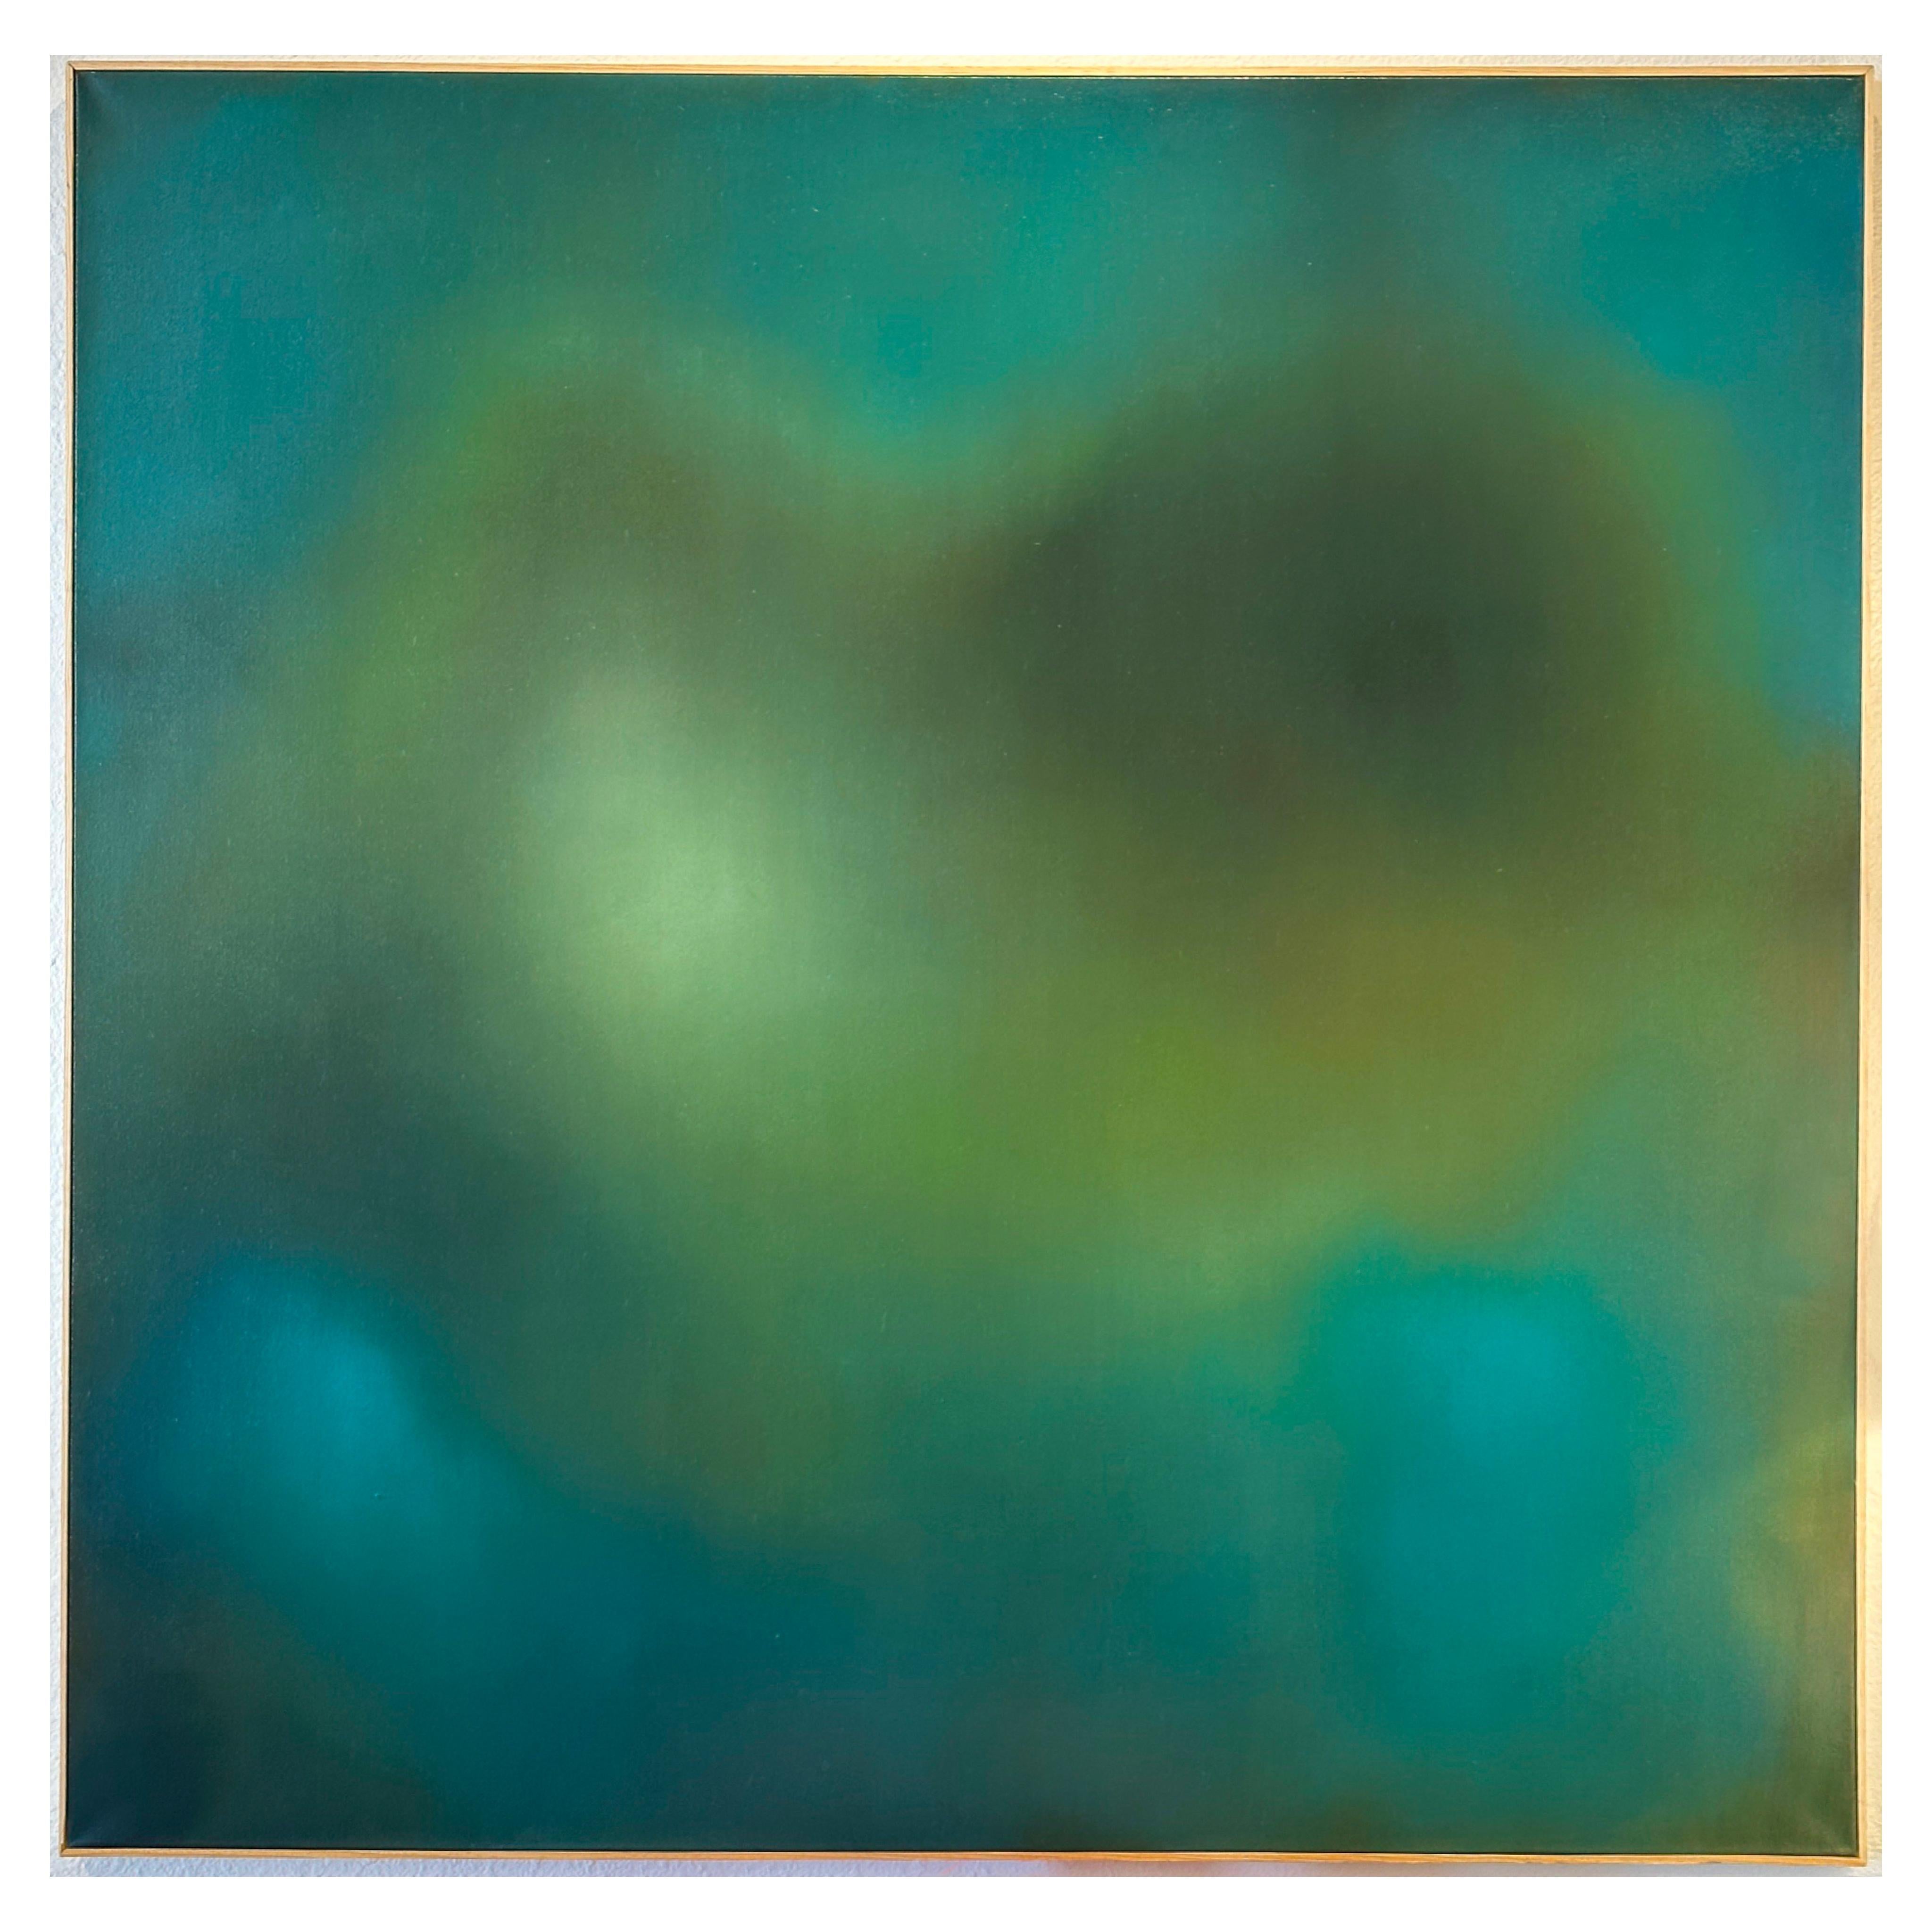 Robin Harker Large Blue-Green Abstract Oil on Canvas California Artist 2023.

Framed in natural wood artist frame. Edges are unfinished as it is expected that the buyer will have framed to their taste. 

Signed en verso.

DIMENSIONS:
48